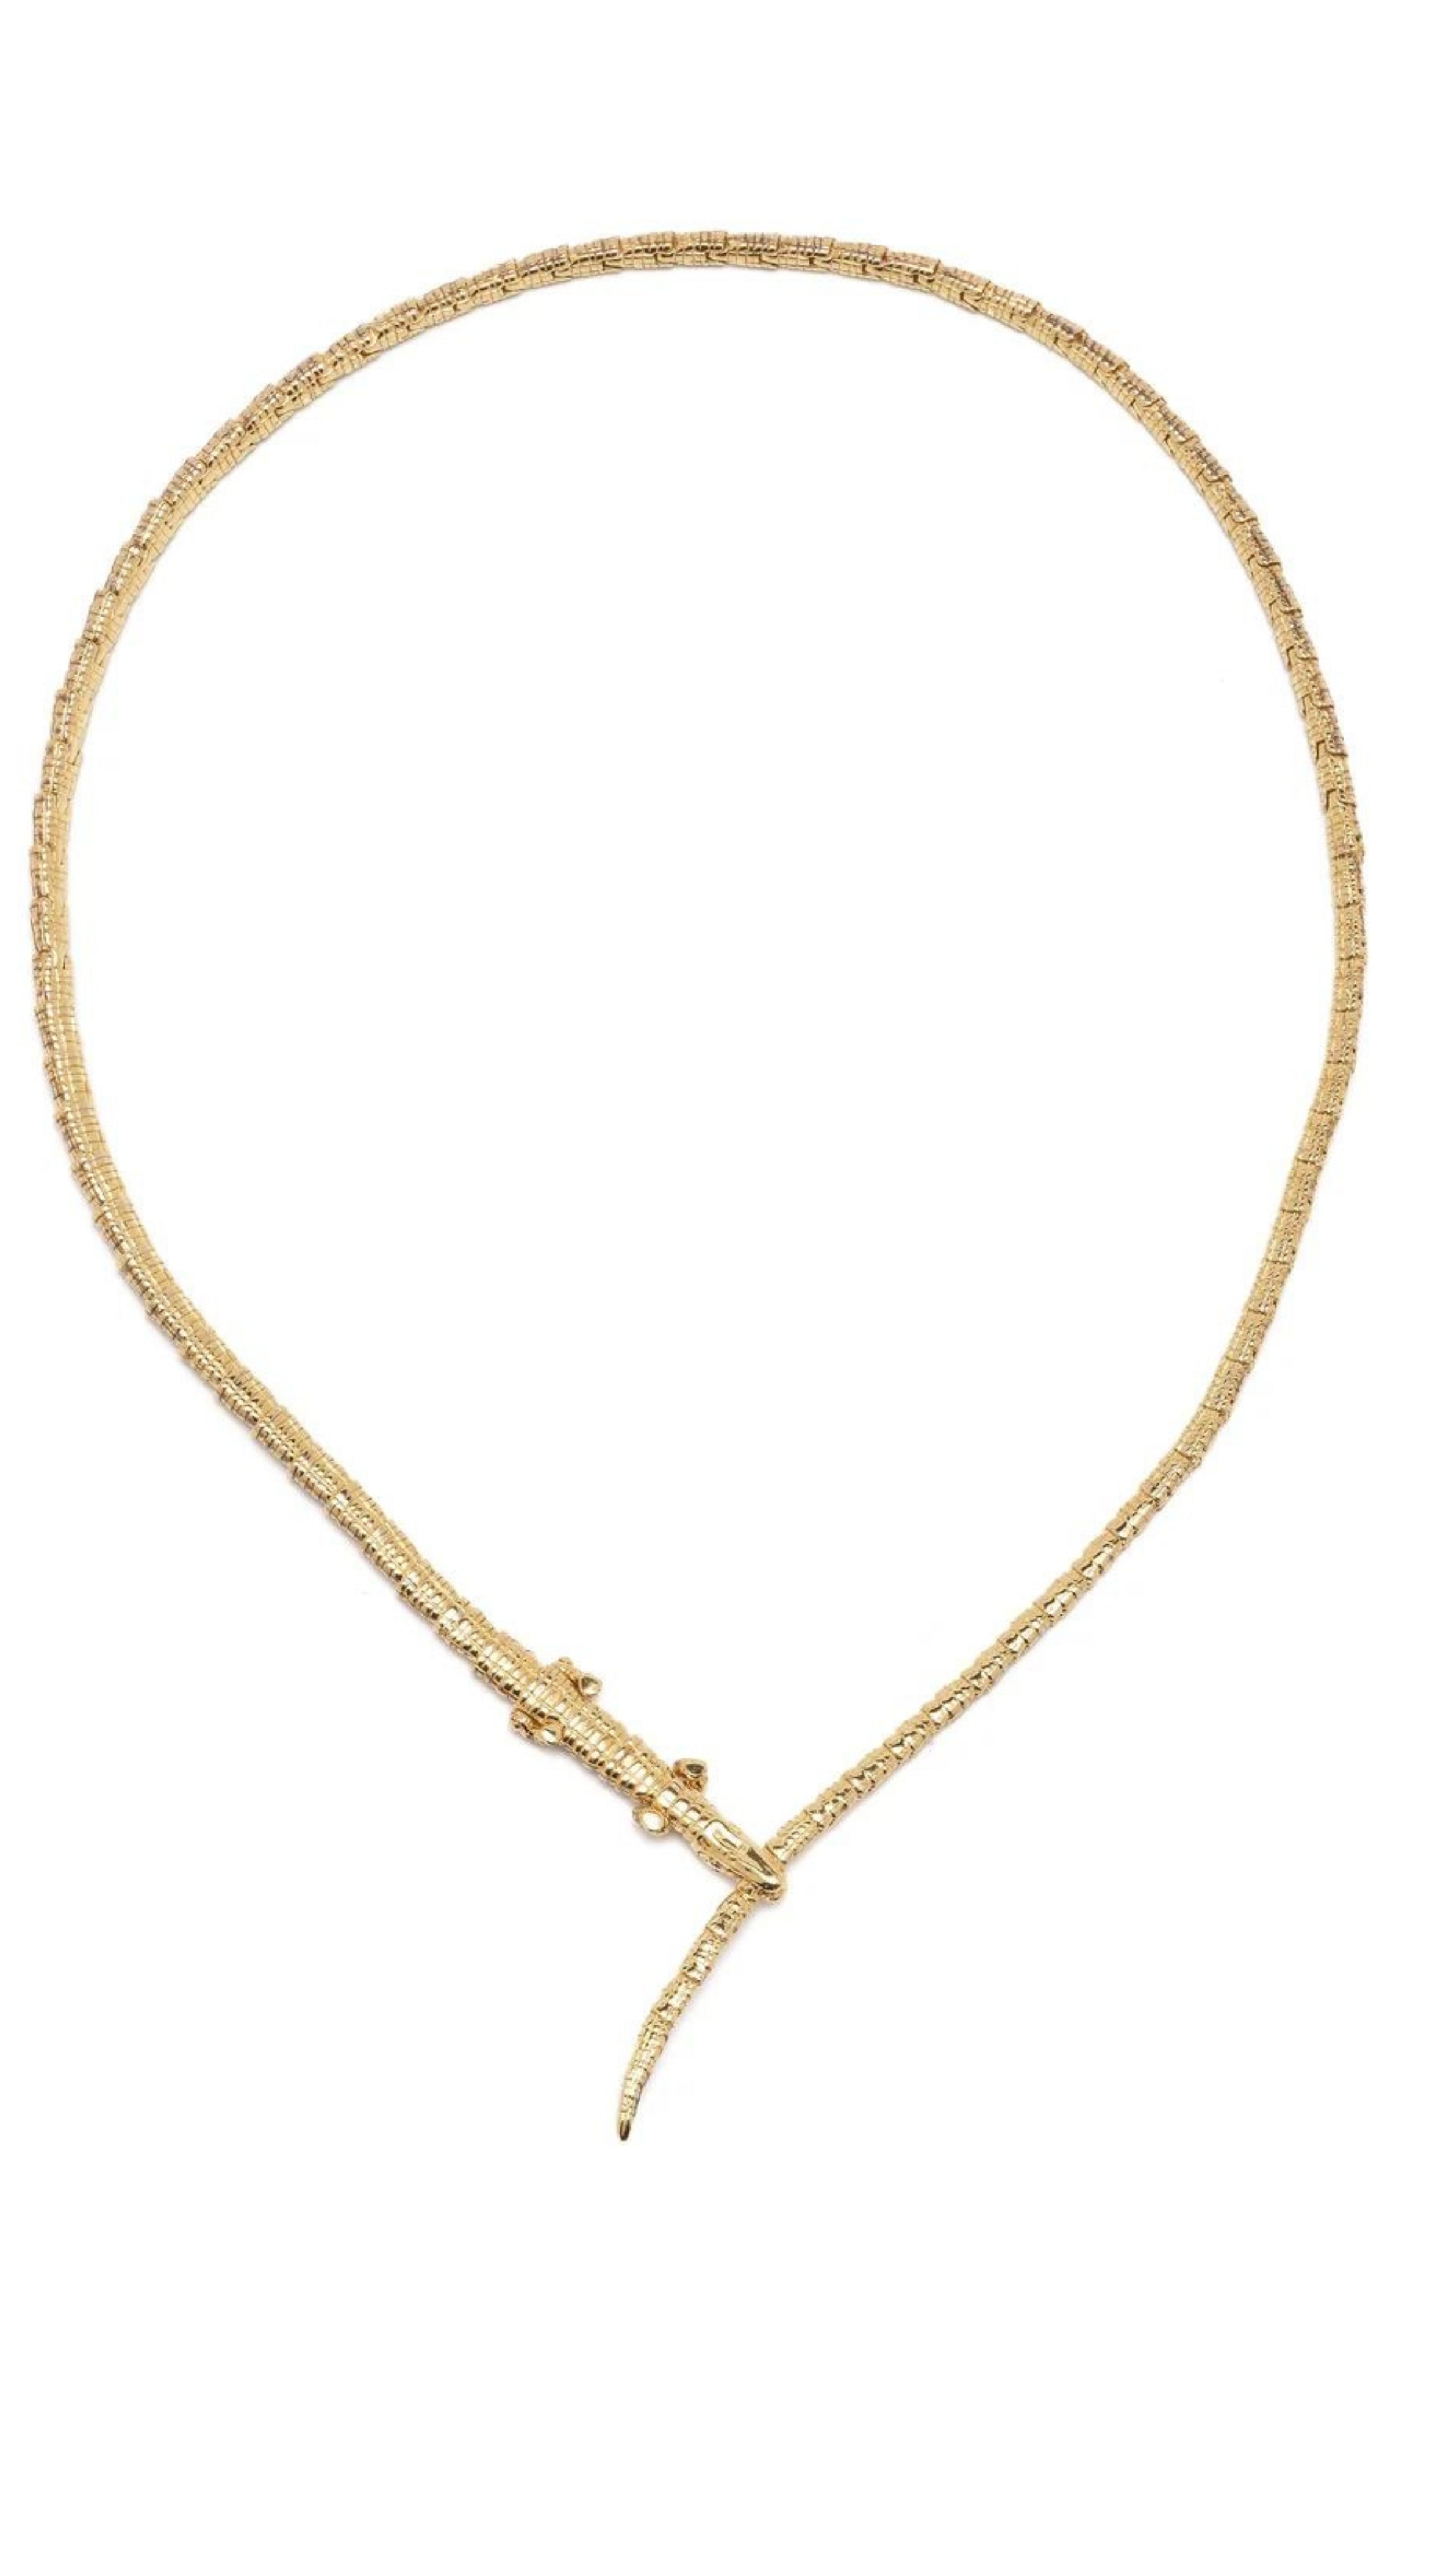 Bibi van der Velden The Alligator Wrap Thin Necklace made from 18k yellow gold in the shape of body of an alligator. Its elongated tail serves as the necklace's length and features a closure of the alligator's jaws snapping down on its own tail in the front. This necklace has  tsavorite eyes and moving feet. Shown on from the top